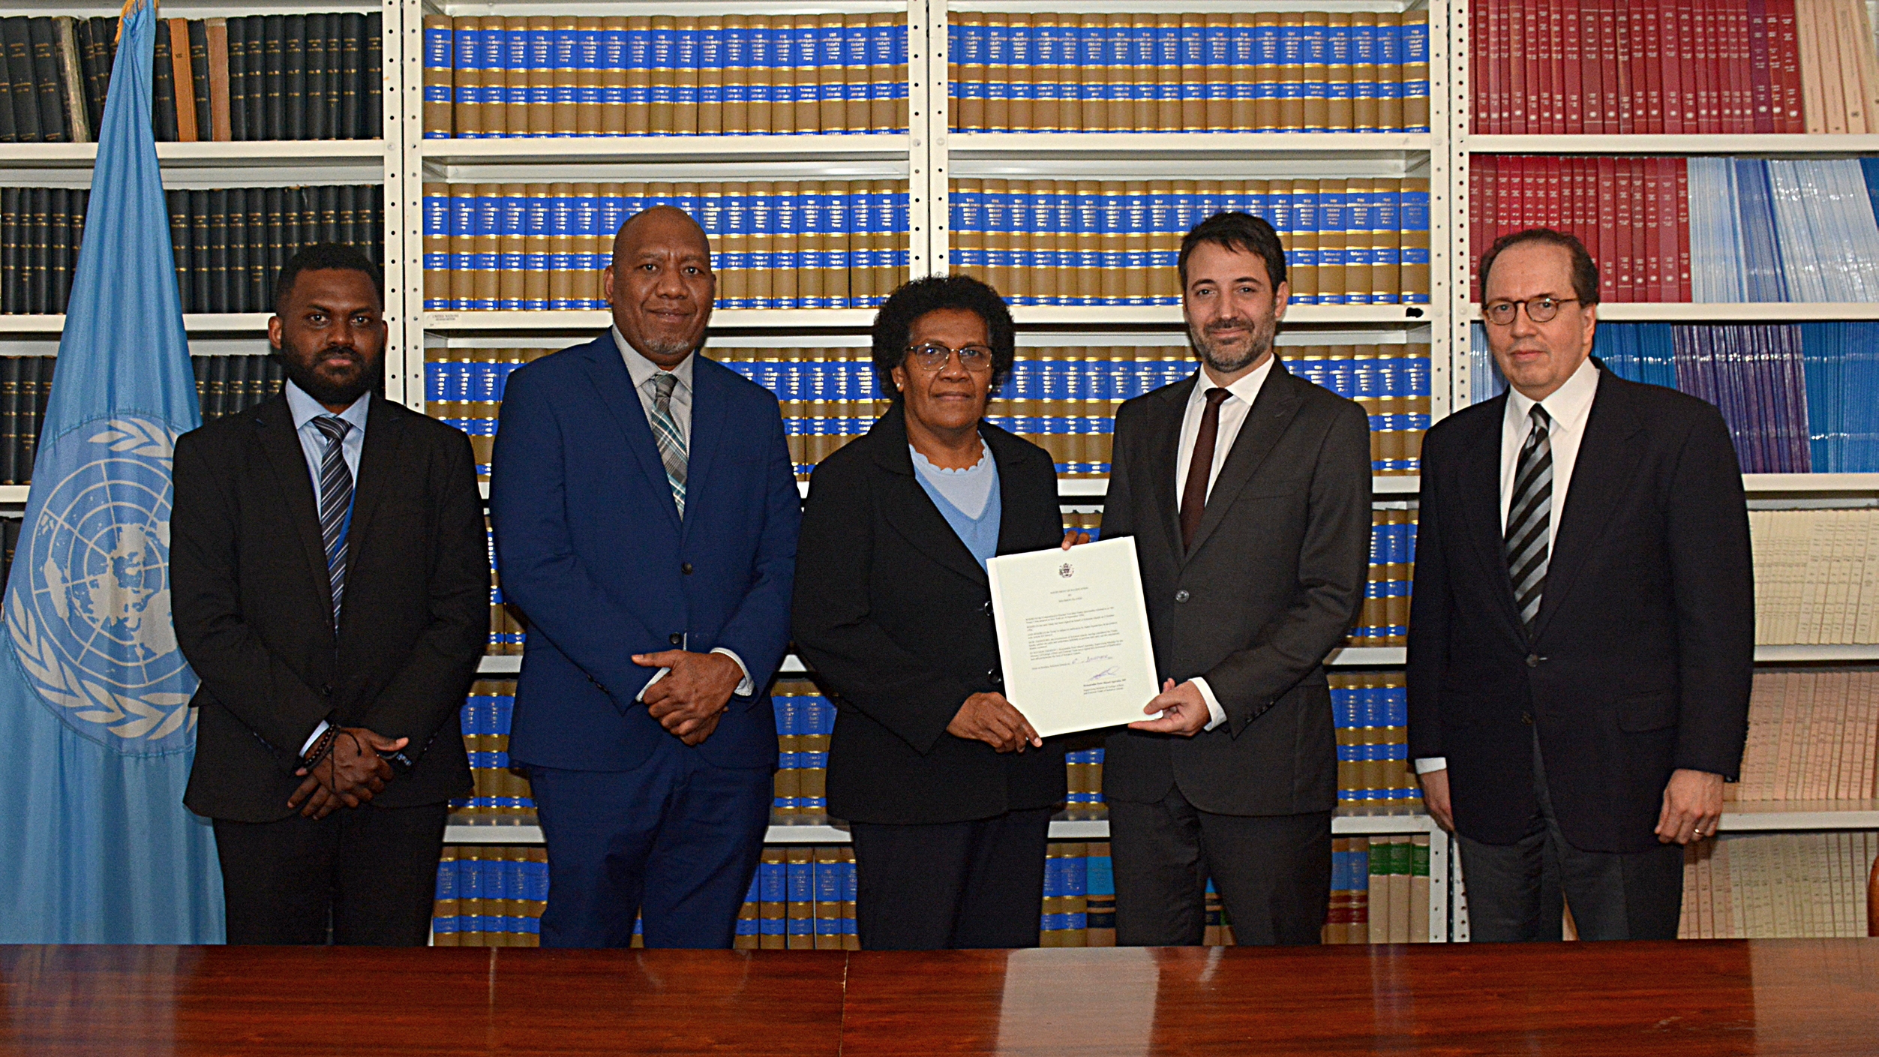  H.E Mrs. Jane Waetara formally deposits the Comprehensive Nuclear Test Ban Treaty in a ceremony at the UN Headquarters to mark the ratification. Mr. David Nanopoulos, Chief of the UN Treaty Section officiated the ceremony witnessed by officials from the Solomon Islands Mission to the United Nation in New York and an official from the CTBTO